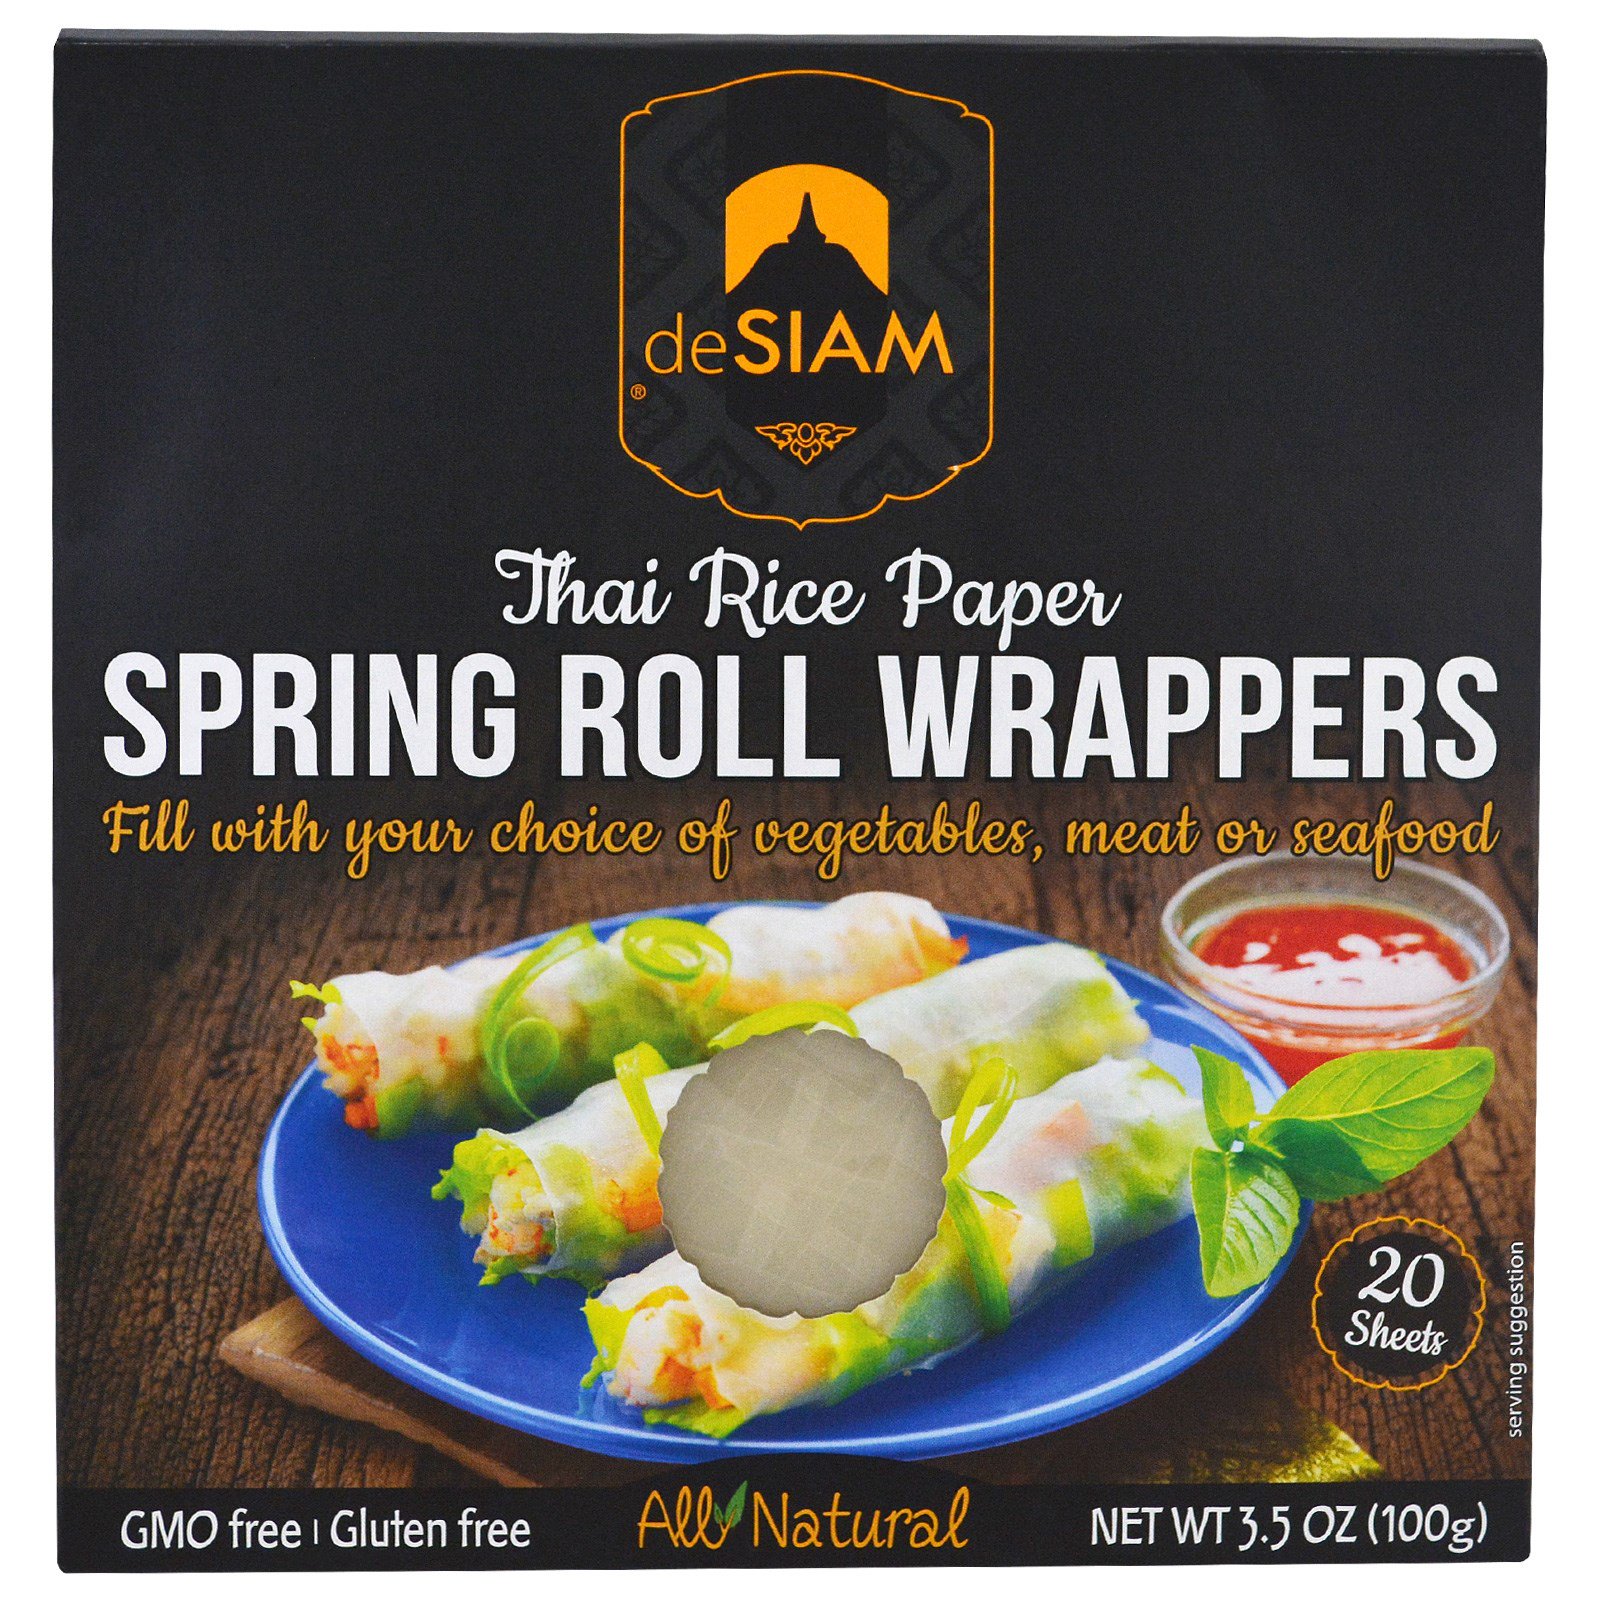 desiam, desiam, thai rice paper, spring roll wrappers, 20 sheets